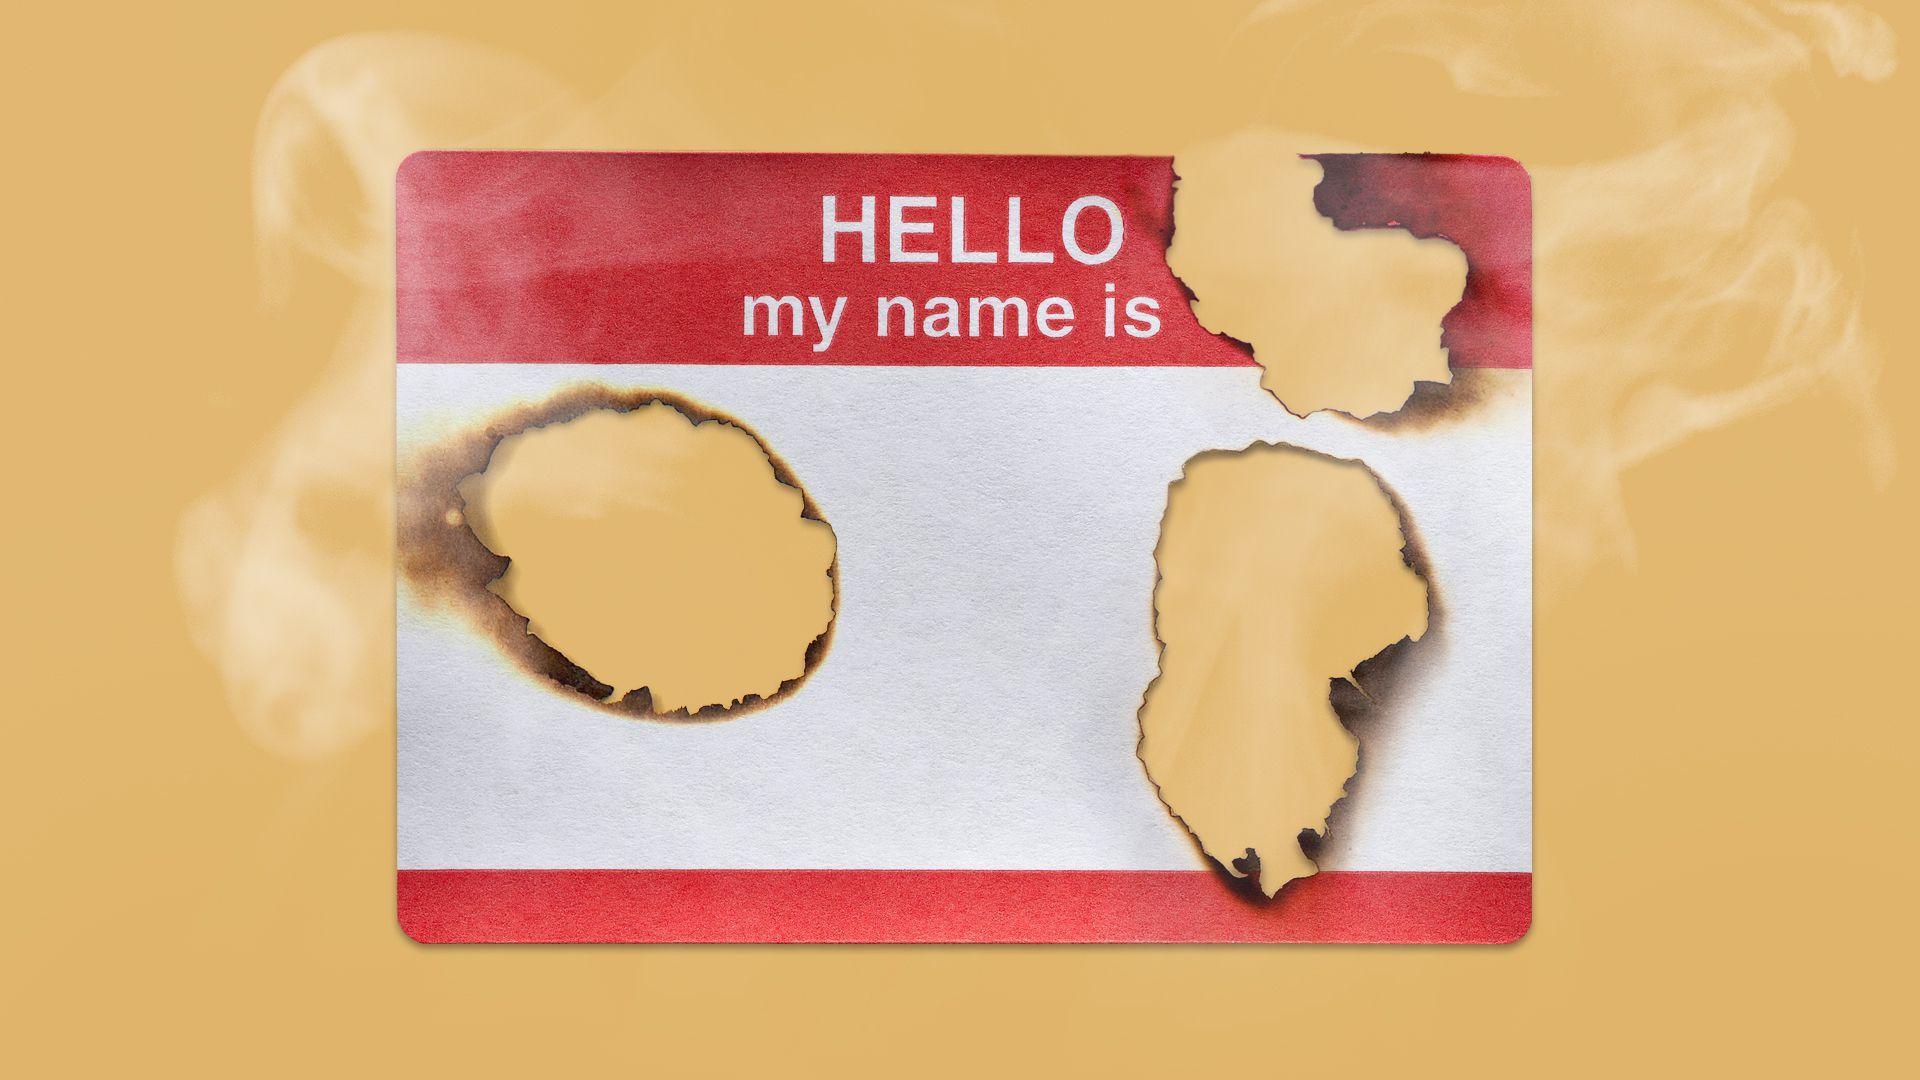 An illustration of a burned name tag.